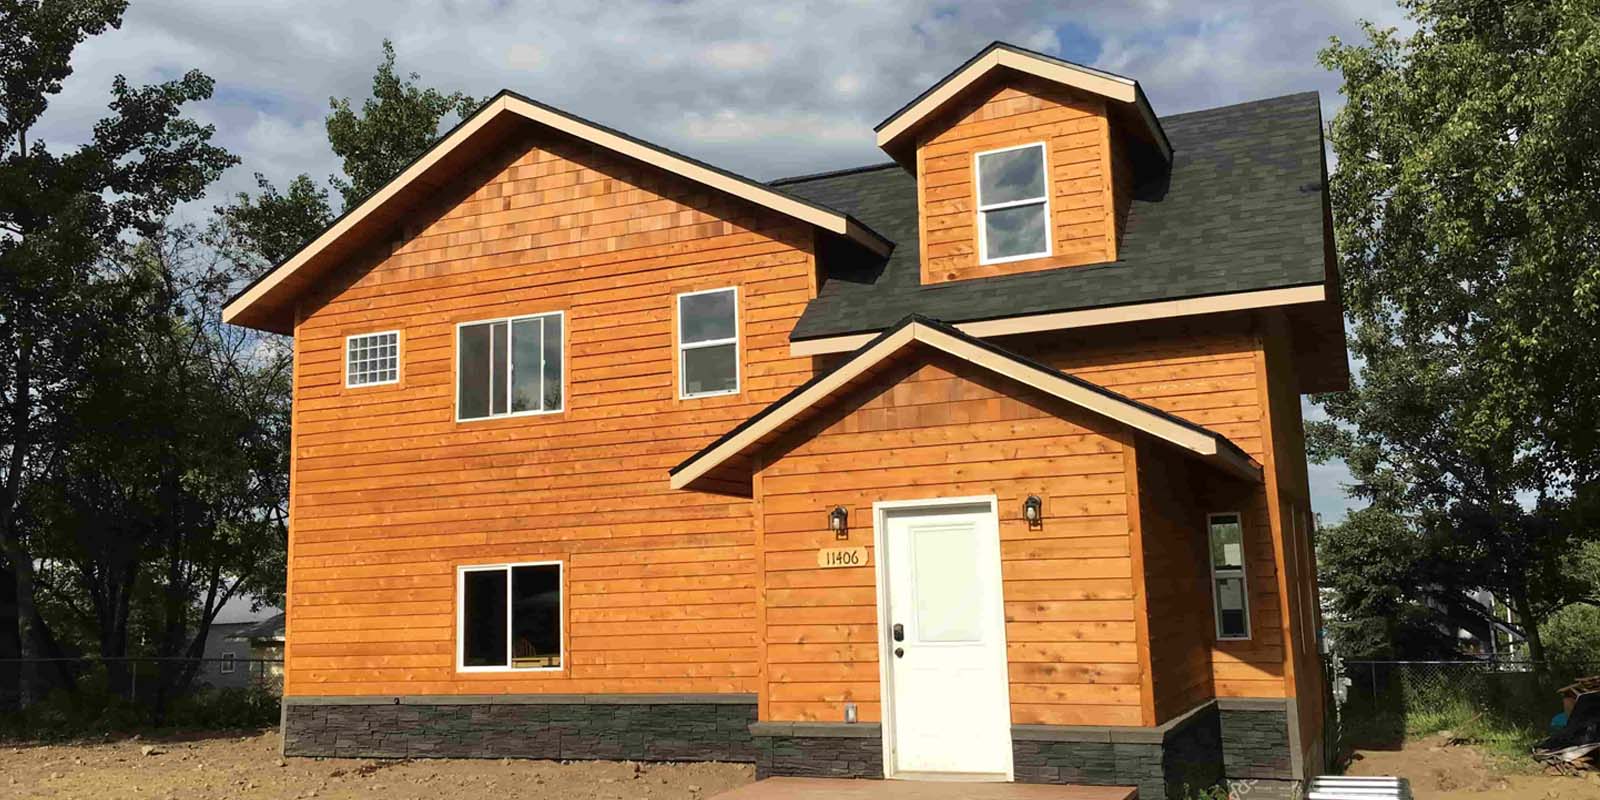 Exterior Staining | PaintAnchorage.com